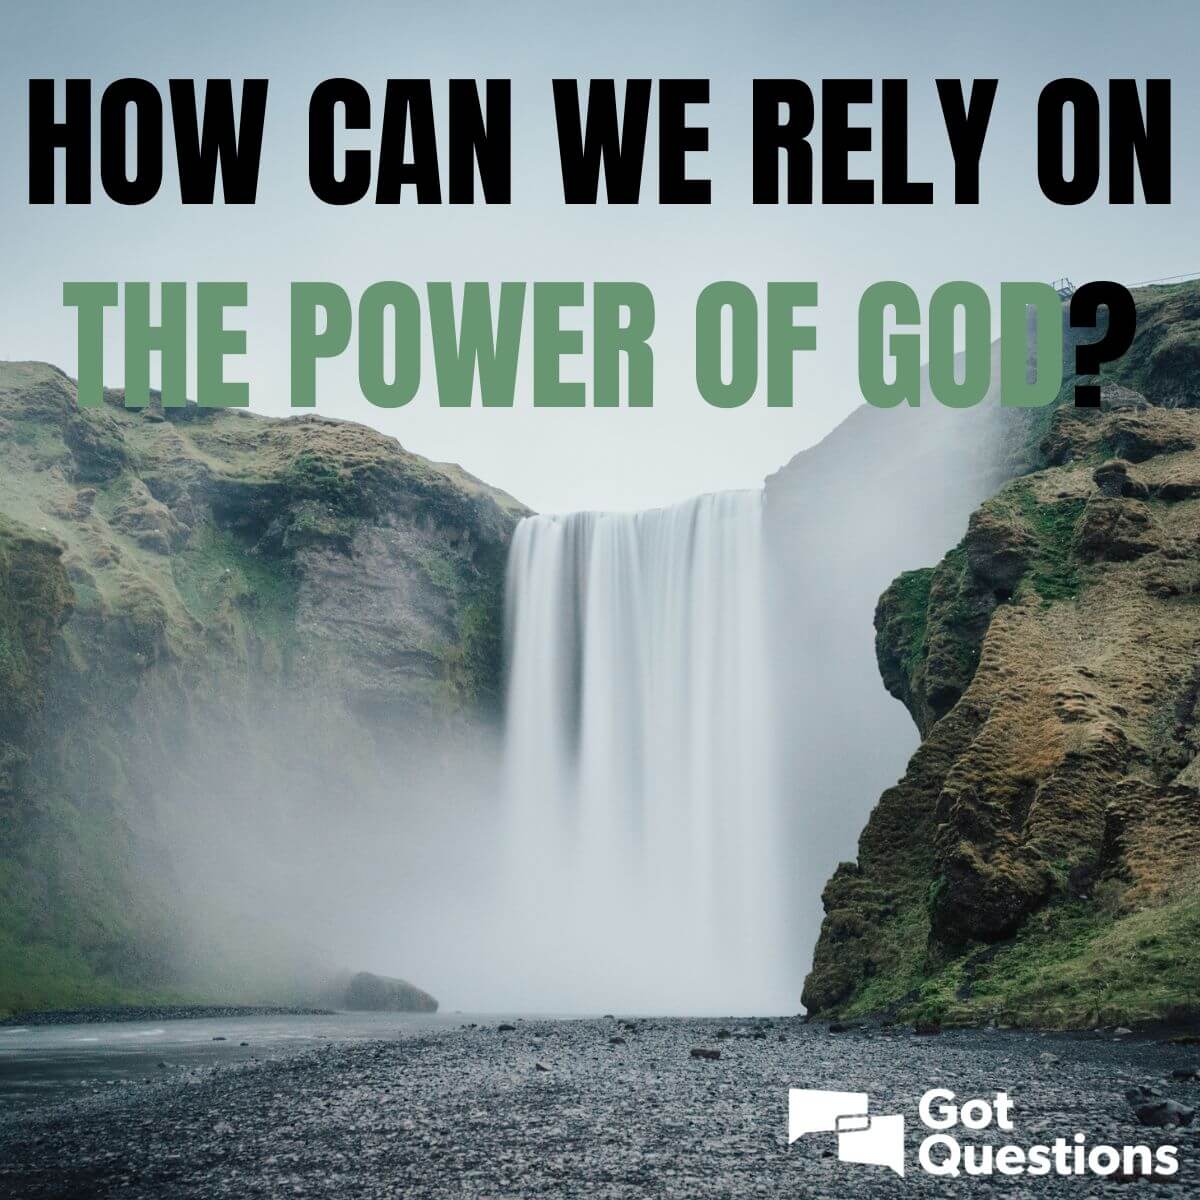 How can we rely on the power of God?